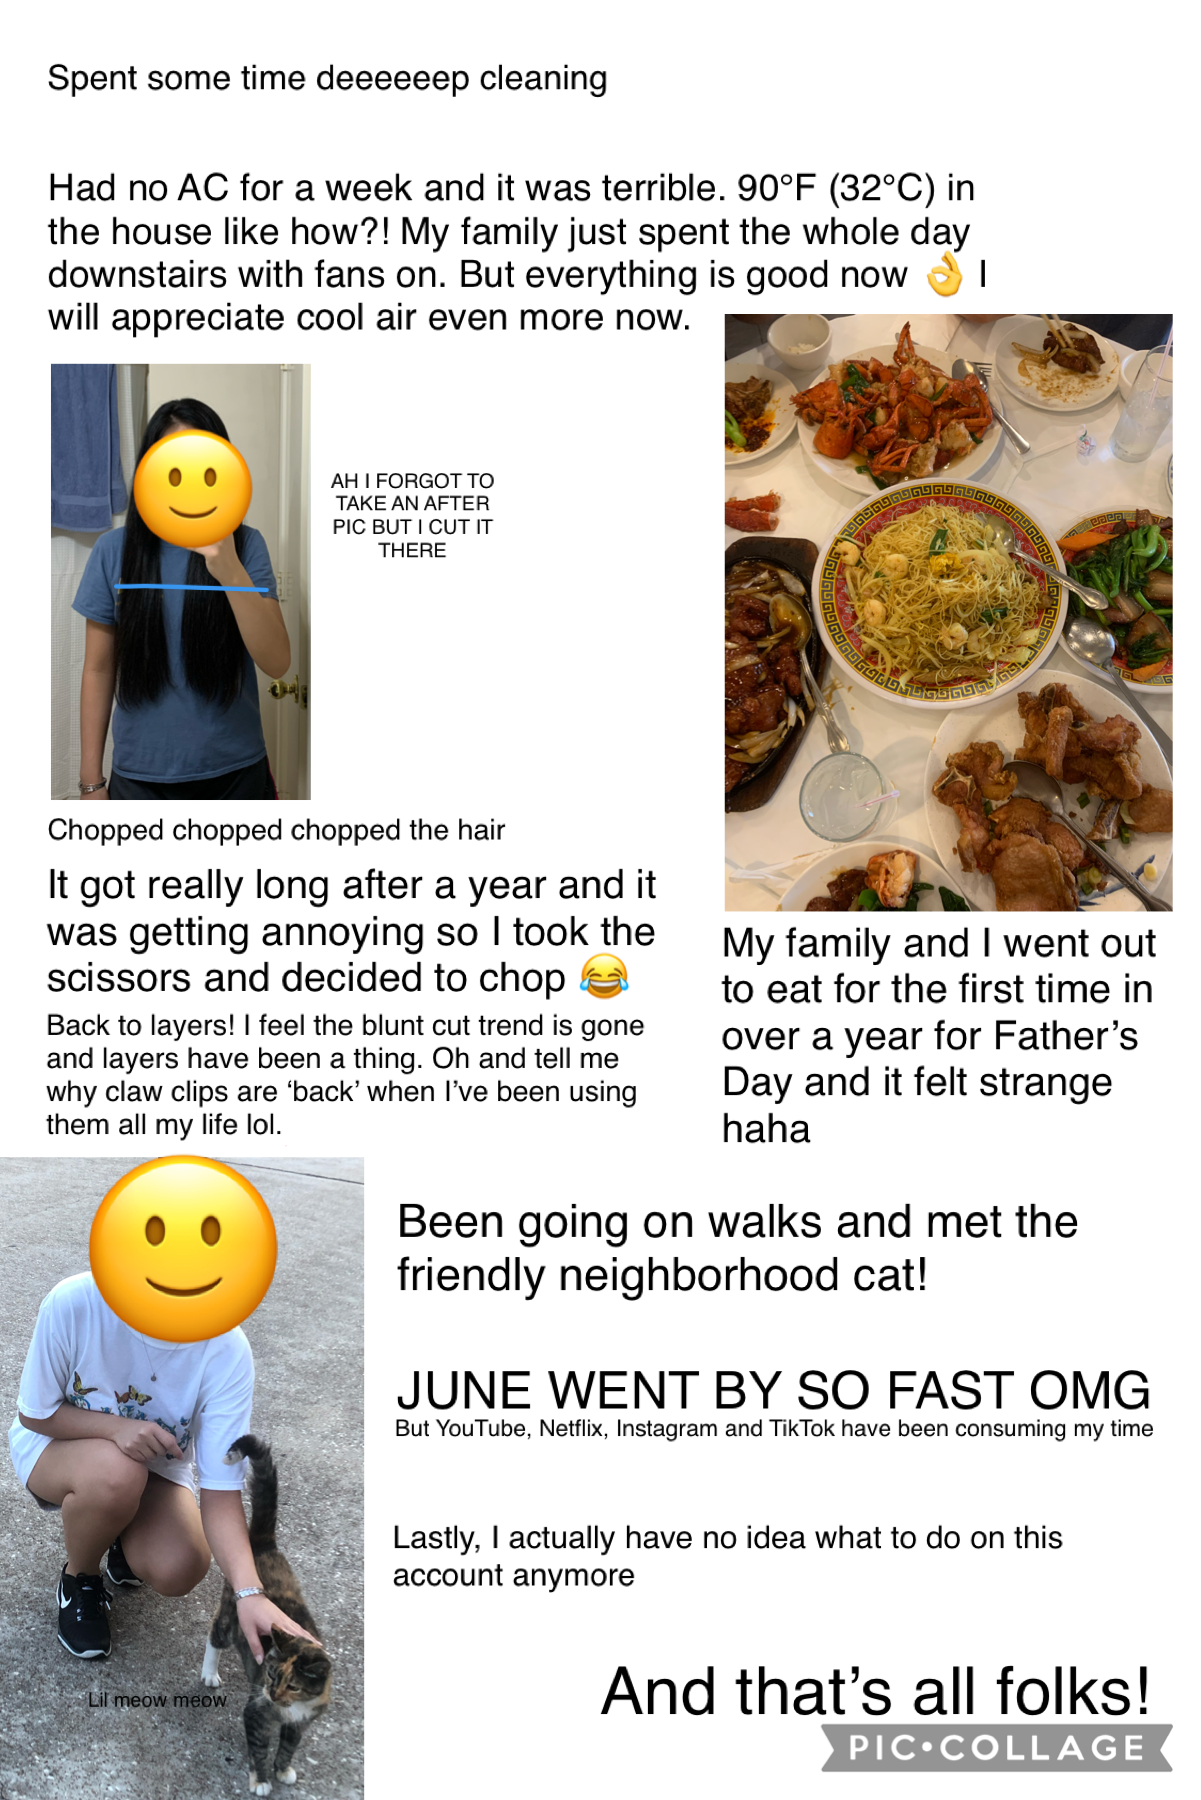 7/2/21 | June Recap | I meant to post this on the last day of June ofc but for some reason thought Thursday was June 30th but I was out and about today so I forgot and it’s now past midnight so now I’m 2 days late 